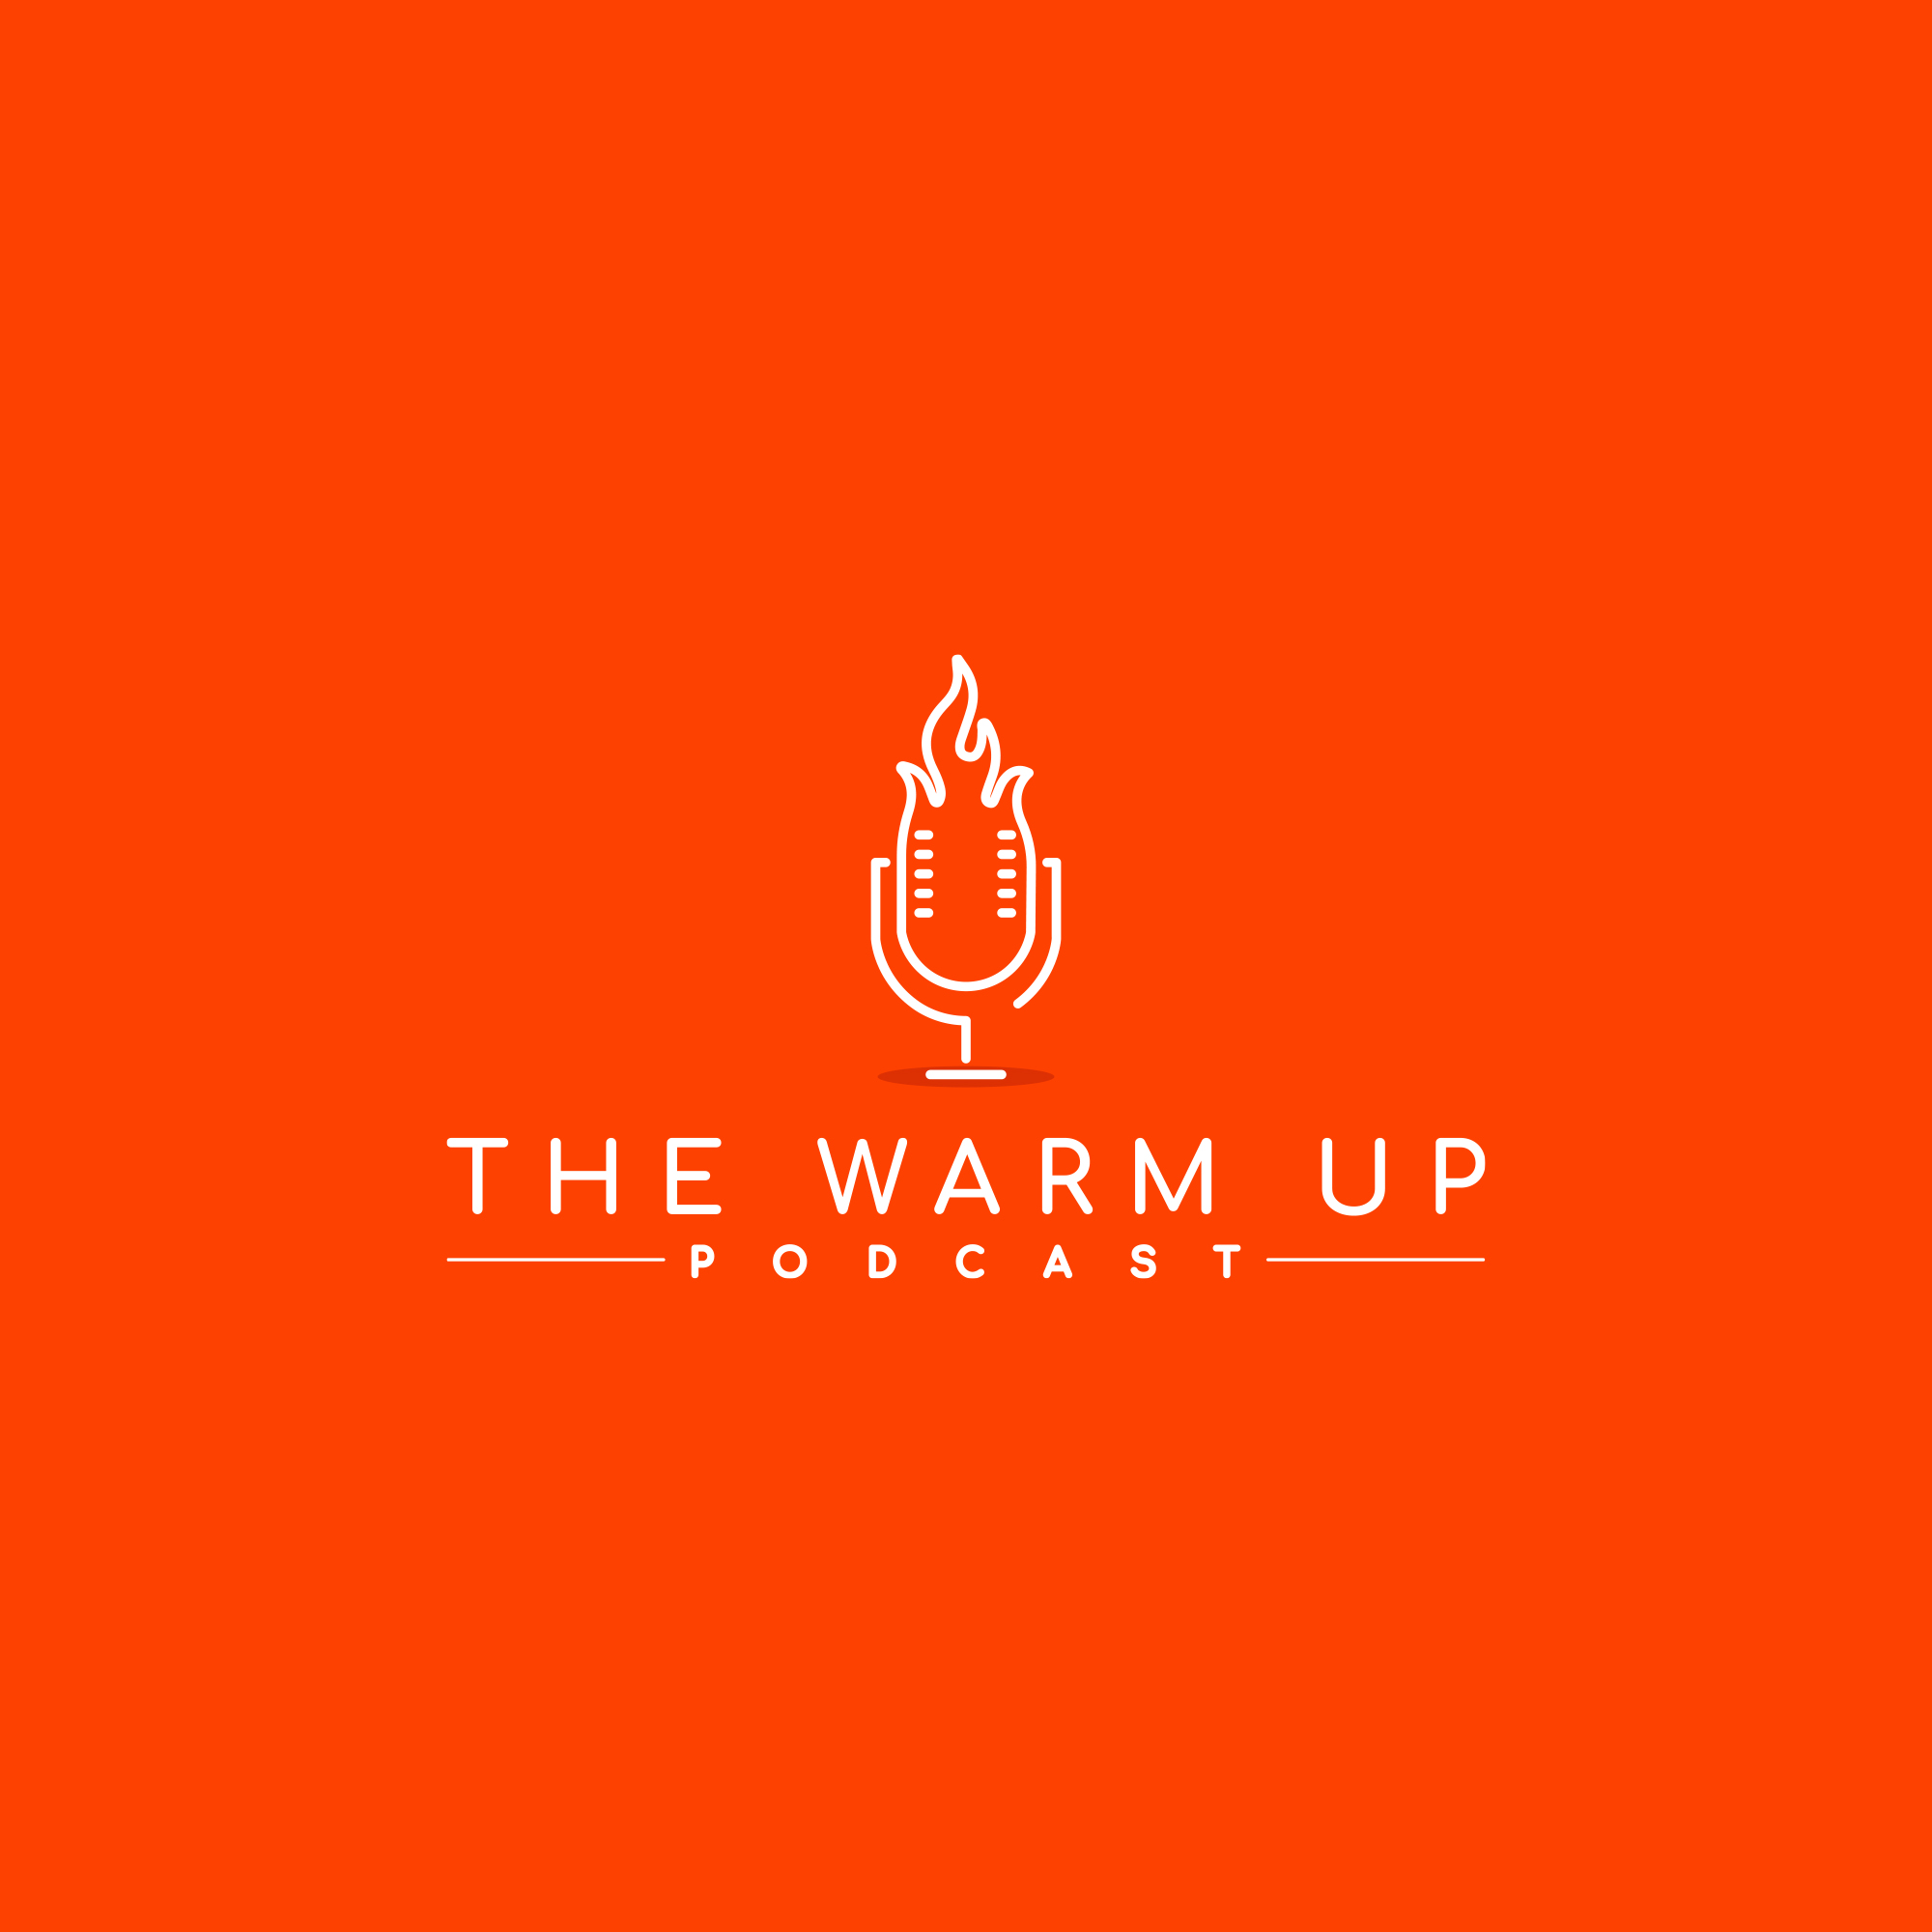 The Warm Up Podcast